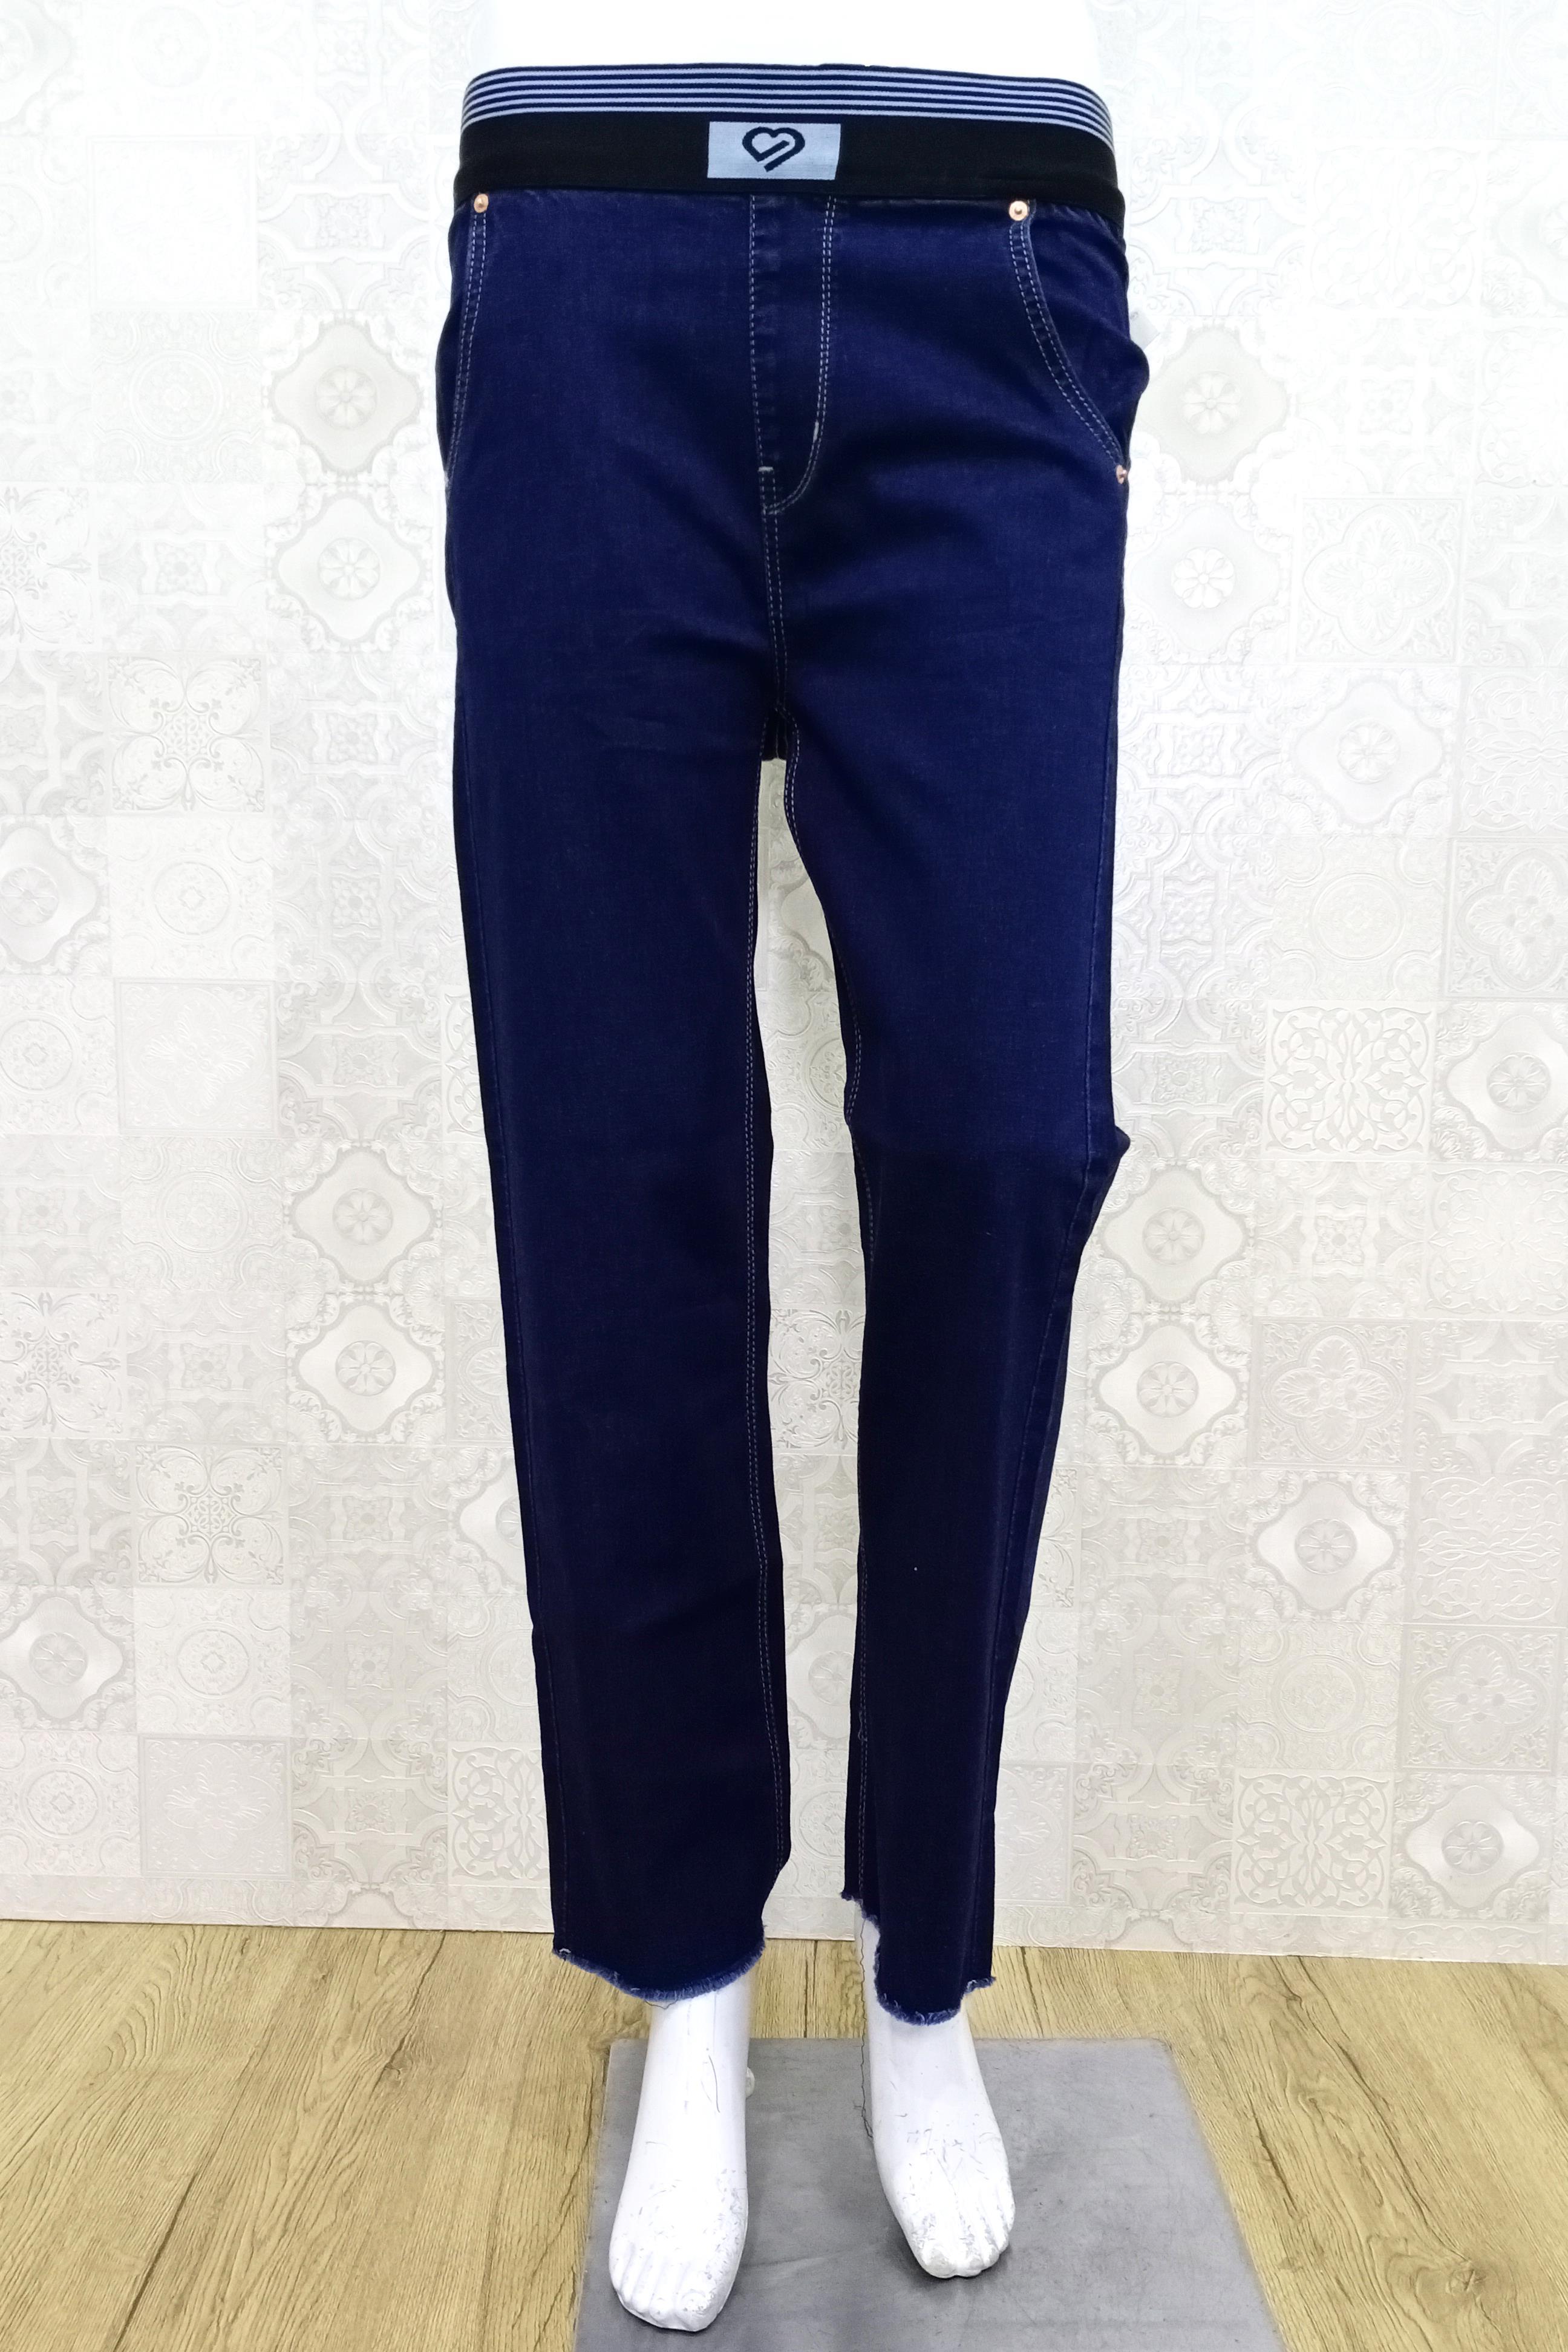 Navy Blue Color Casual Wear Jeans :: ANOKHI FASHION